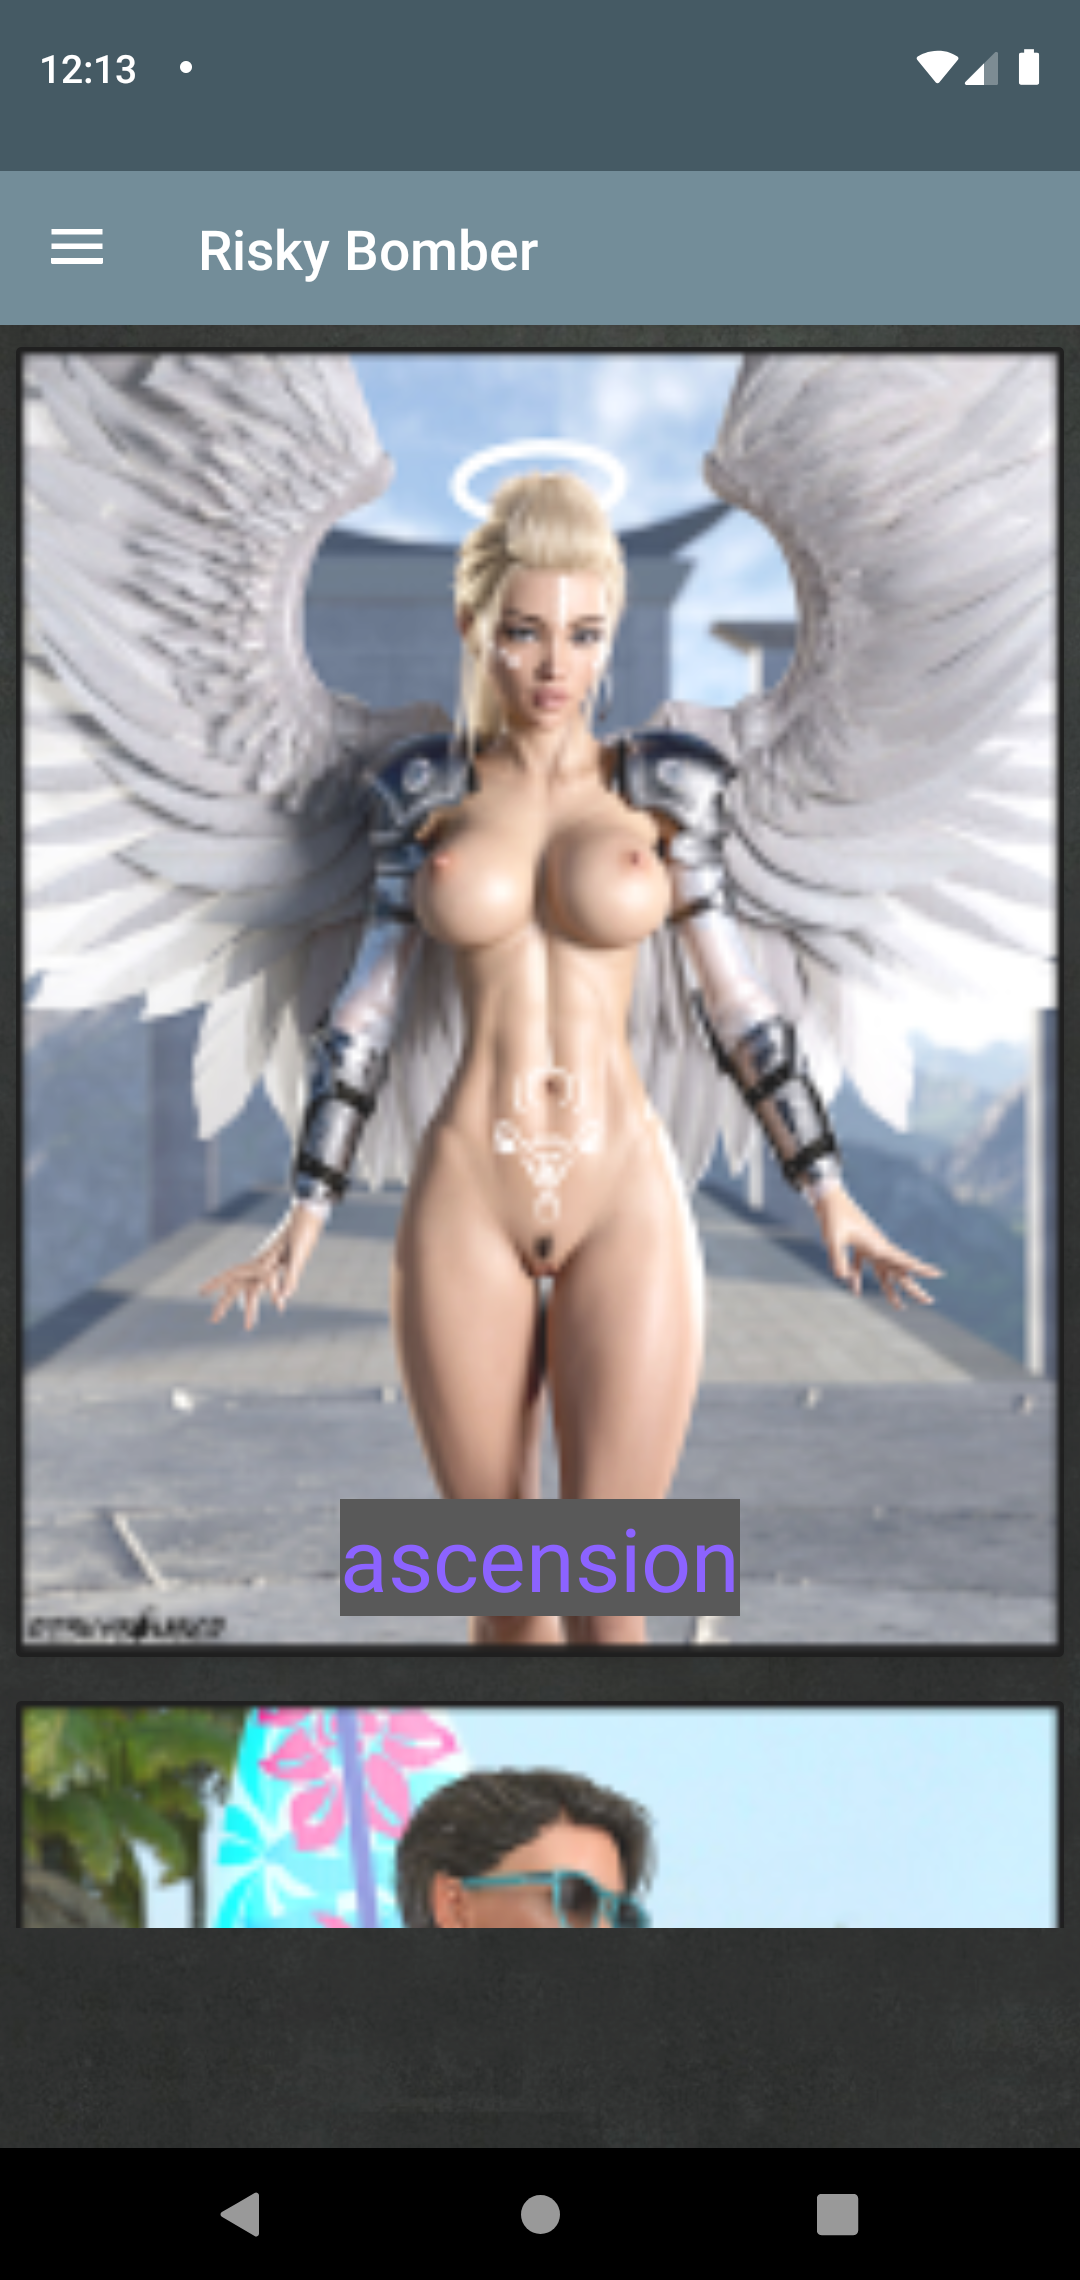 Risky Bomber Pictures best,sexy,viewer,hot,anal,henta,erotic,free,henati,android,image,topless,art,pictures,tattoo,hentai,appa,photo,app,apk,gallery,download,galleries,wallpaper,toys,photos